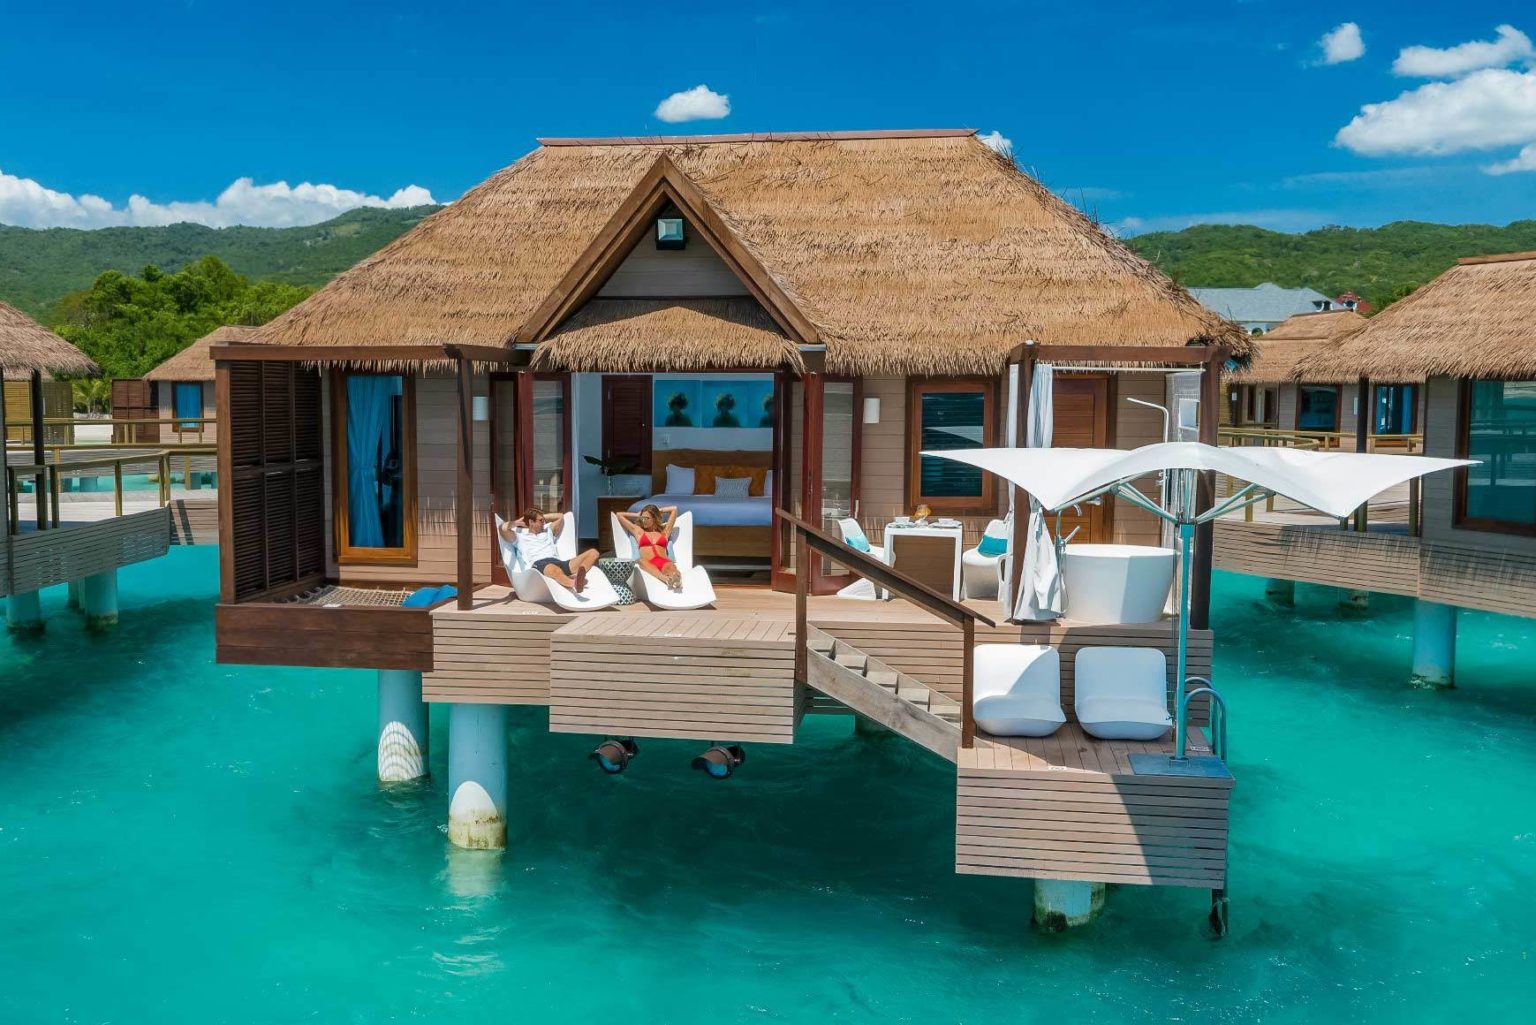 The Best Overwater Bungalows in the Caribbean | SmarterTravel